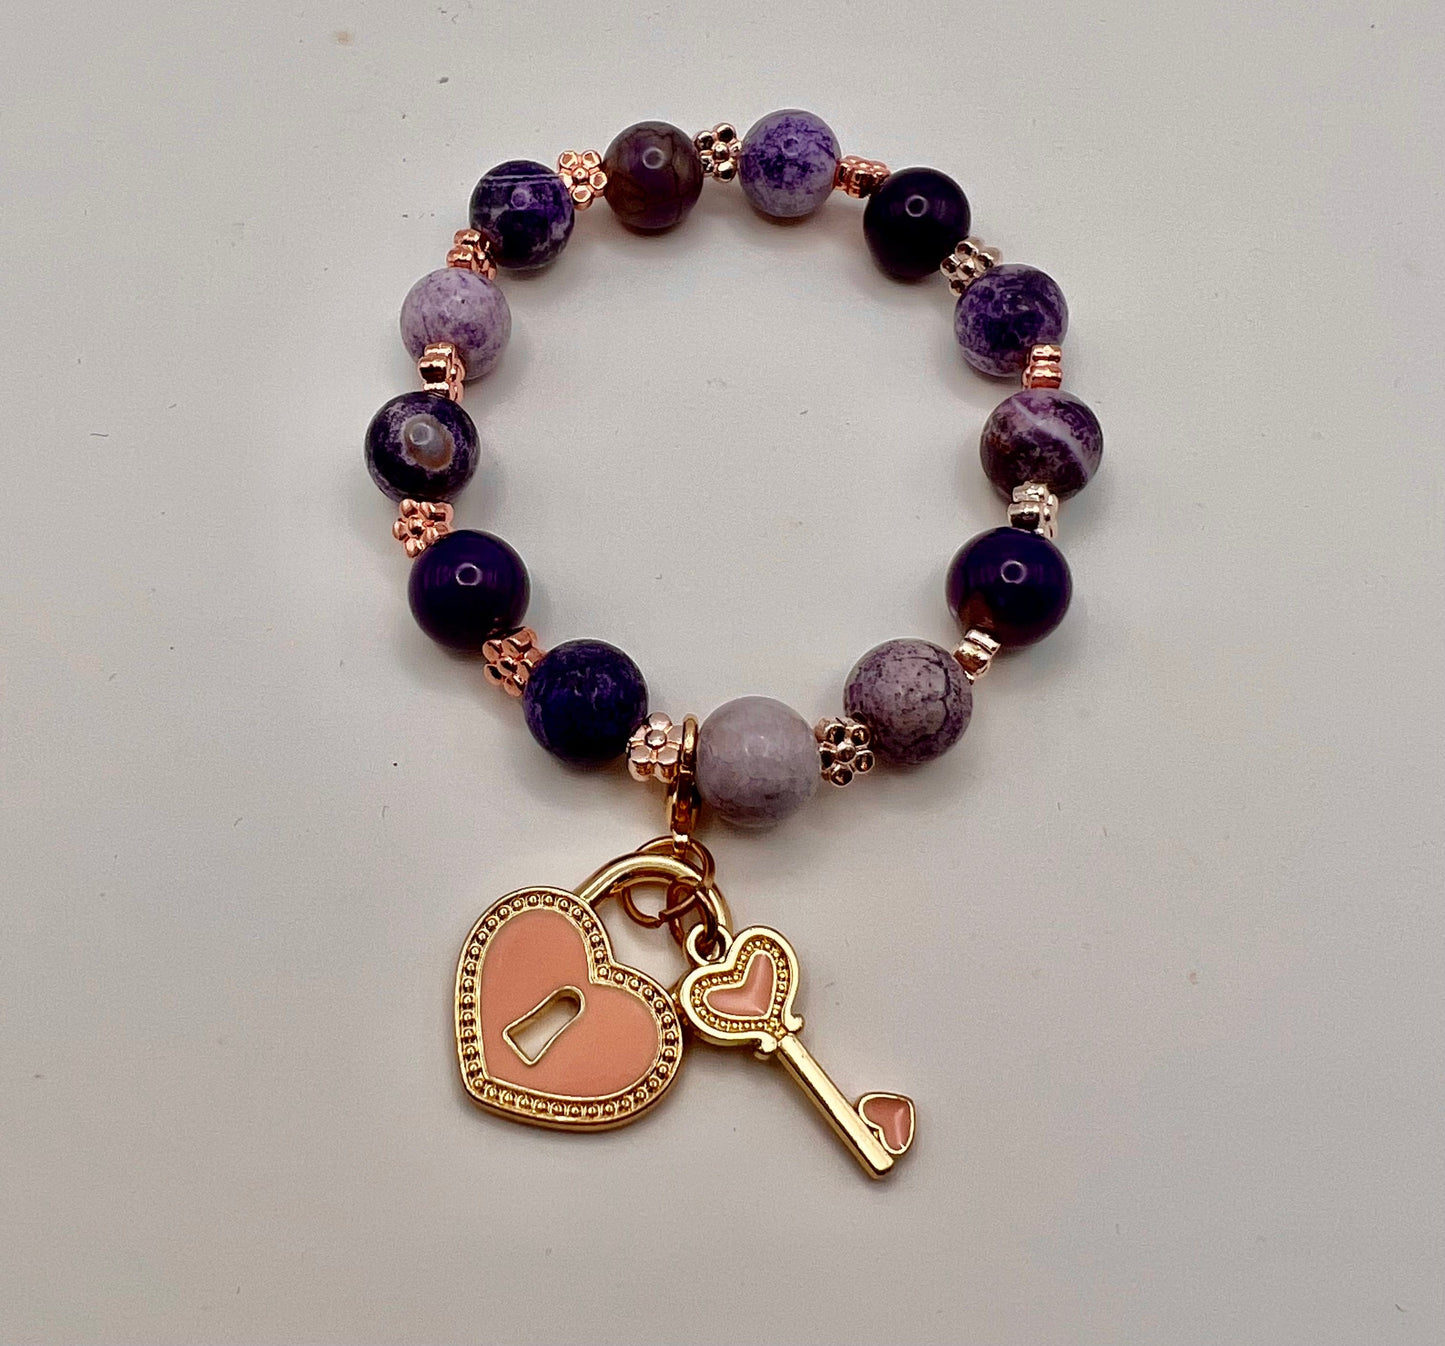 Michelle's Creatives Bracelet 6-1/2 in Purple Agate Beaded Stretch Bracelet with Lock and Key Charm PRP-AGATE-LOCK-KEY-6.5